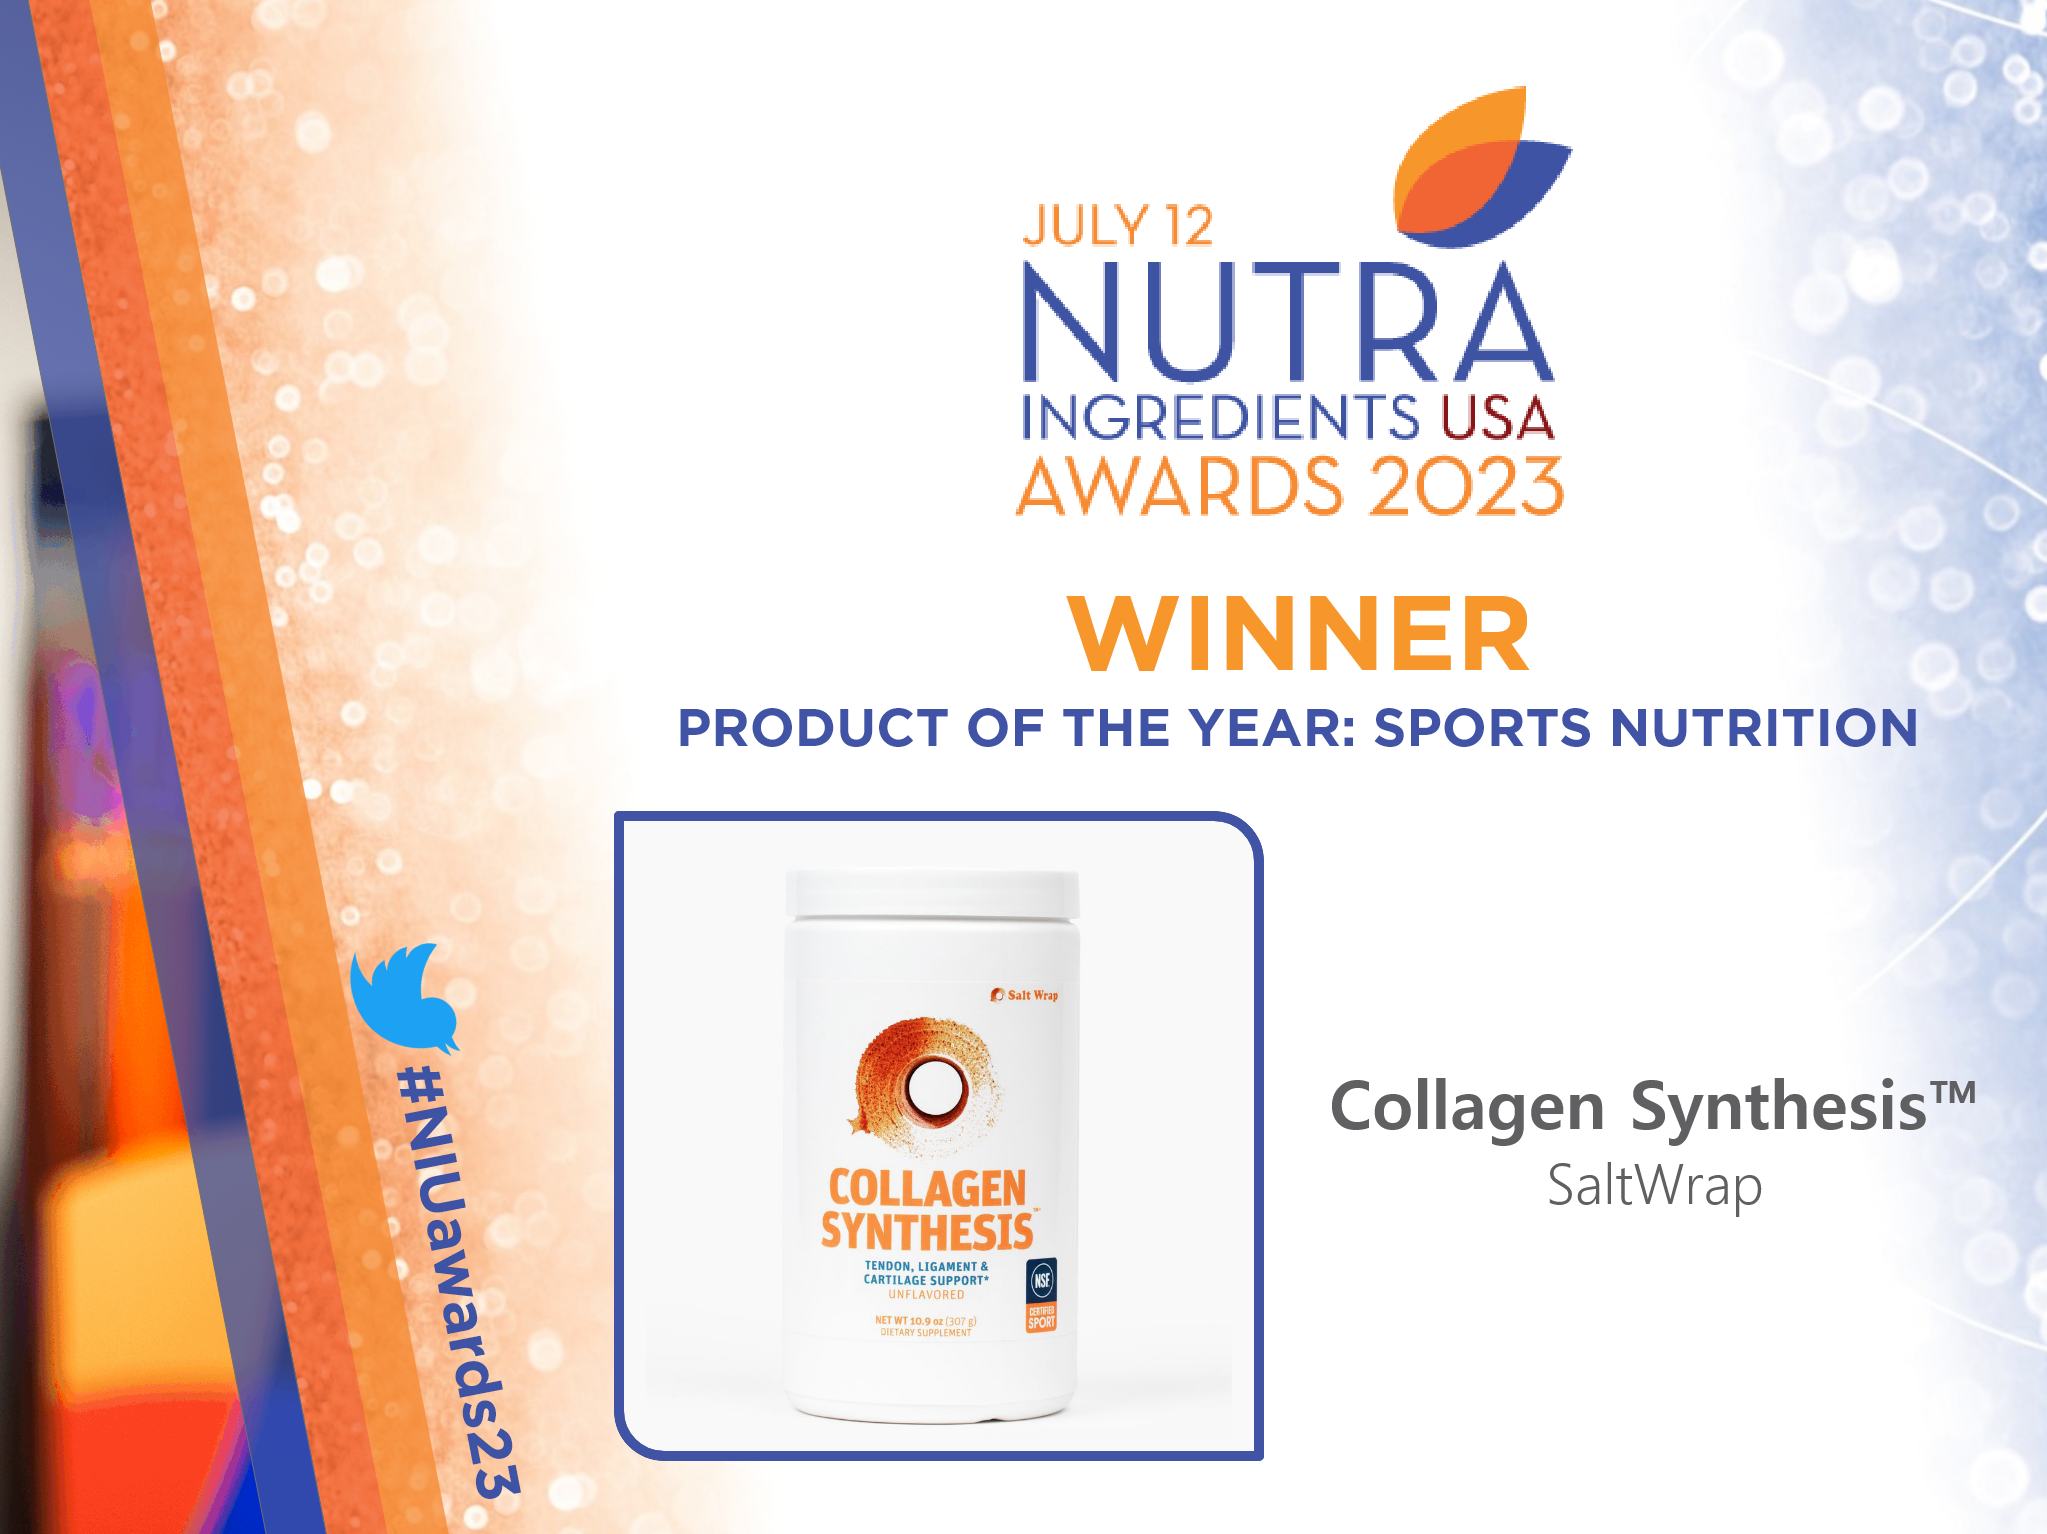 Collagen Synthesis product of the year award banner